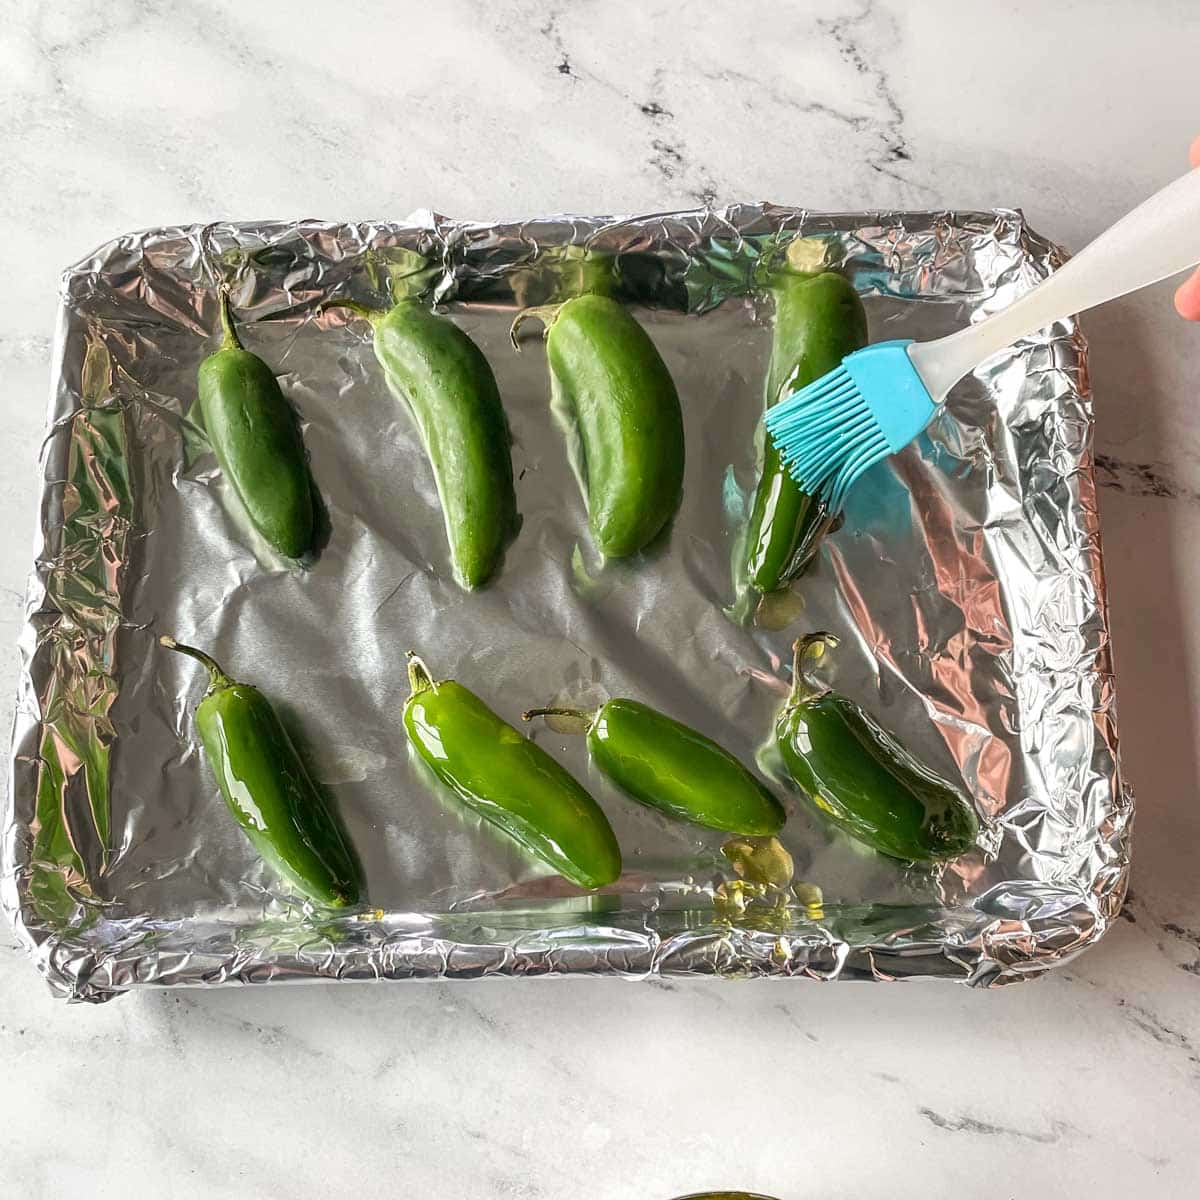 Jalapeños are basted in olive oil on a sheet tray lined with foil.